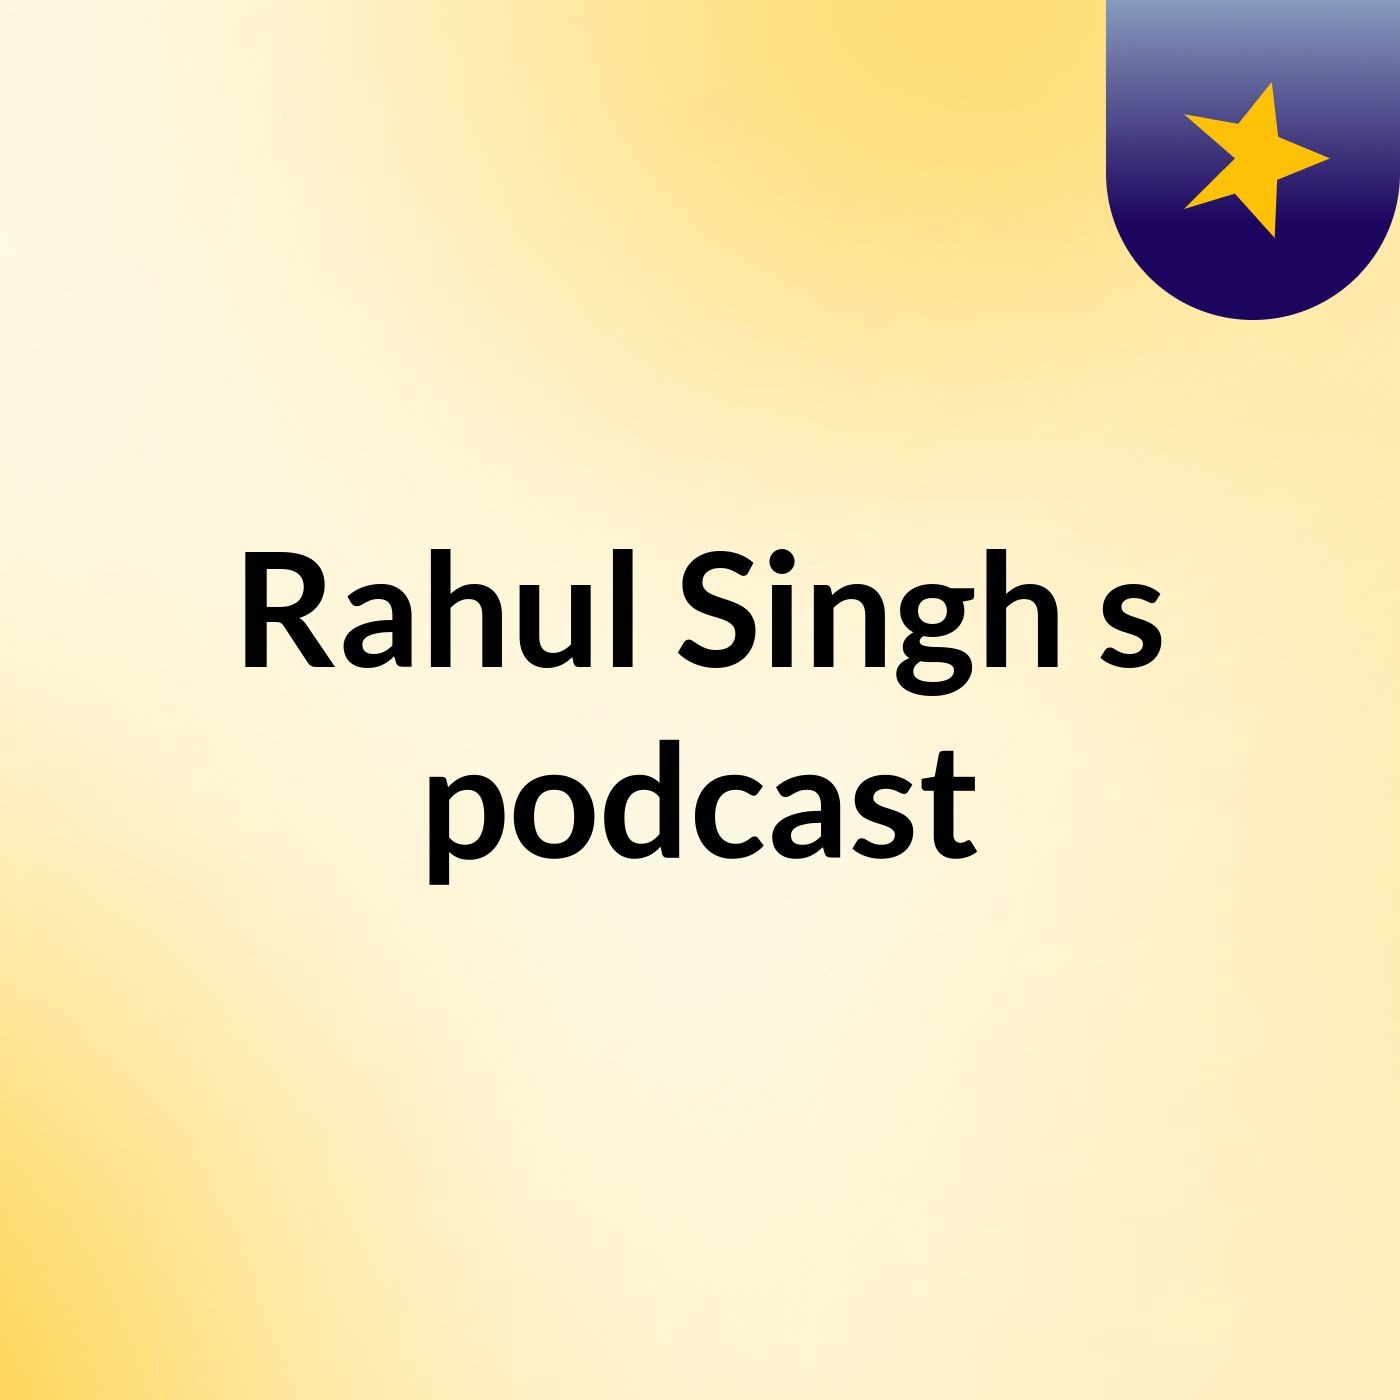 Episode 1 - Rahul Singh's podcast